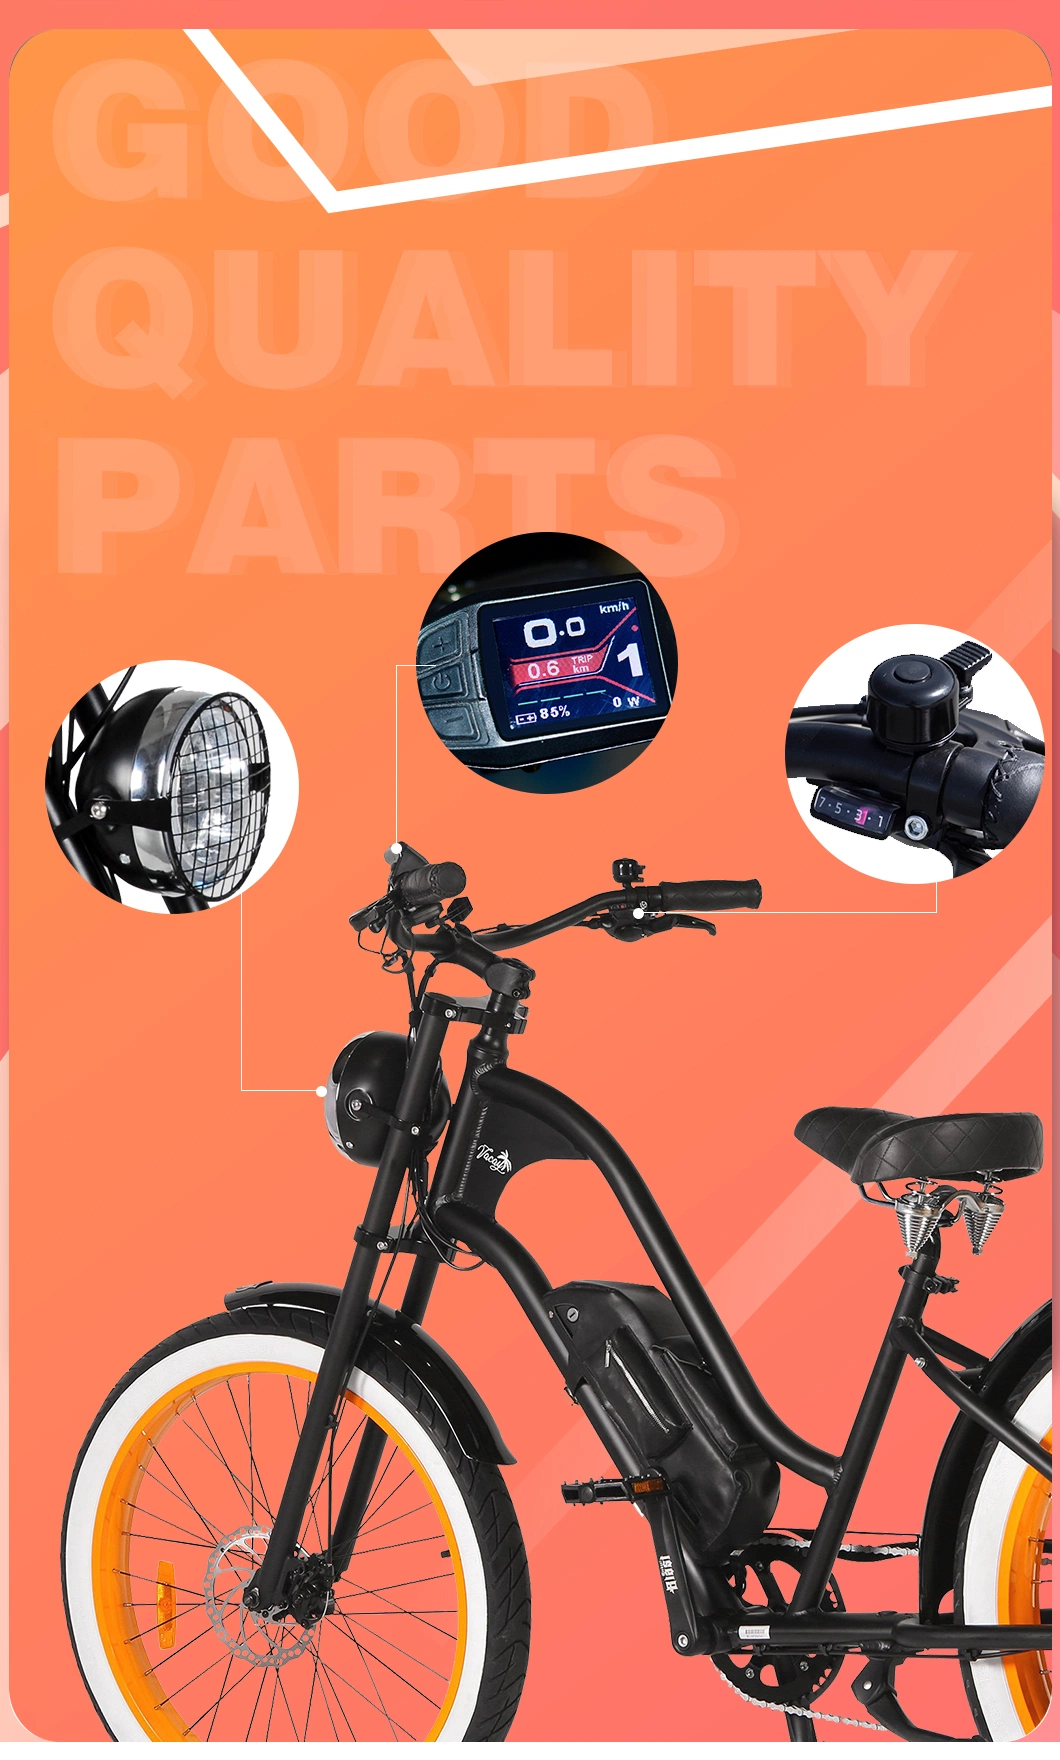 48V Fat Tire Beach Electric Ebike Electric Bicycle with Bafang Motor